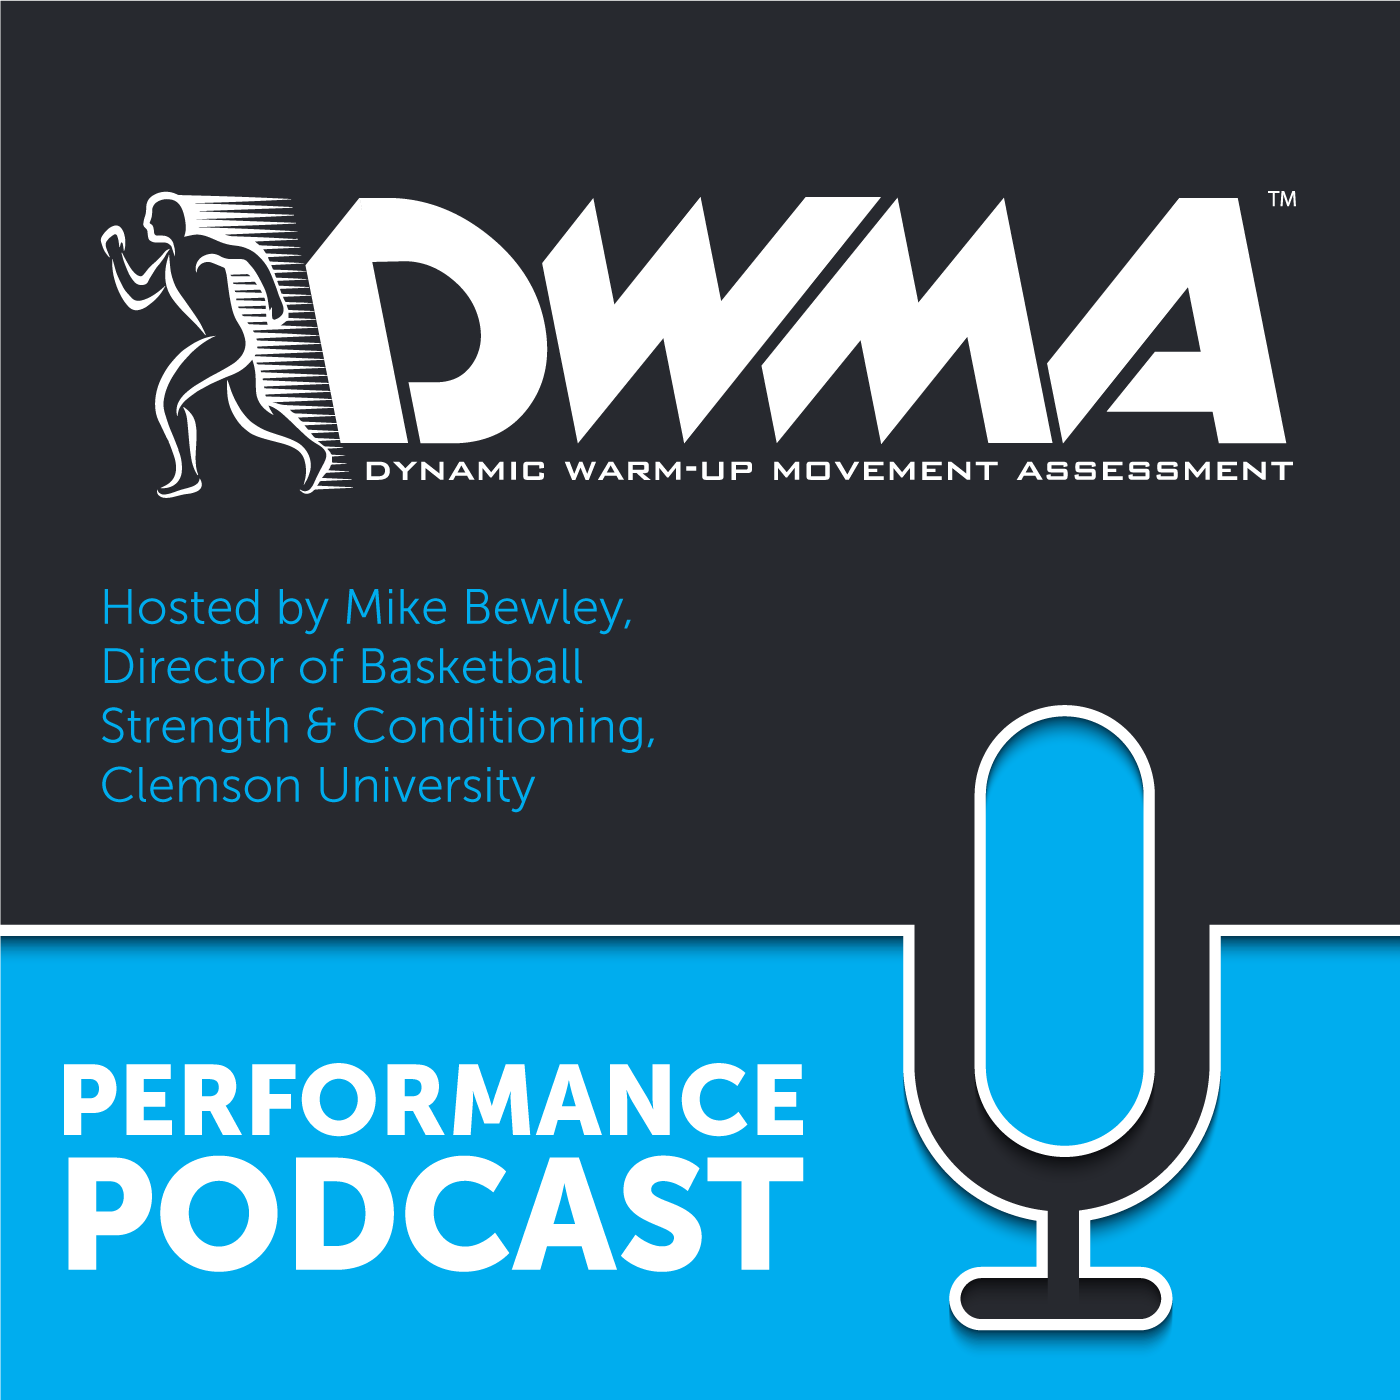 DWMA Performance Podcast Episode #1: Ryan Johnson - "Be a Farmer and worry about YOUR field!"